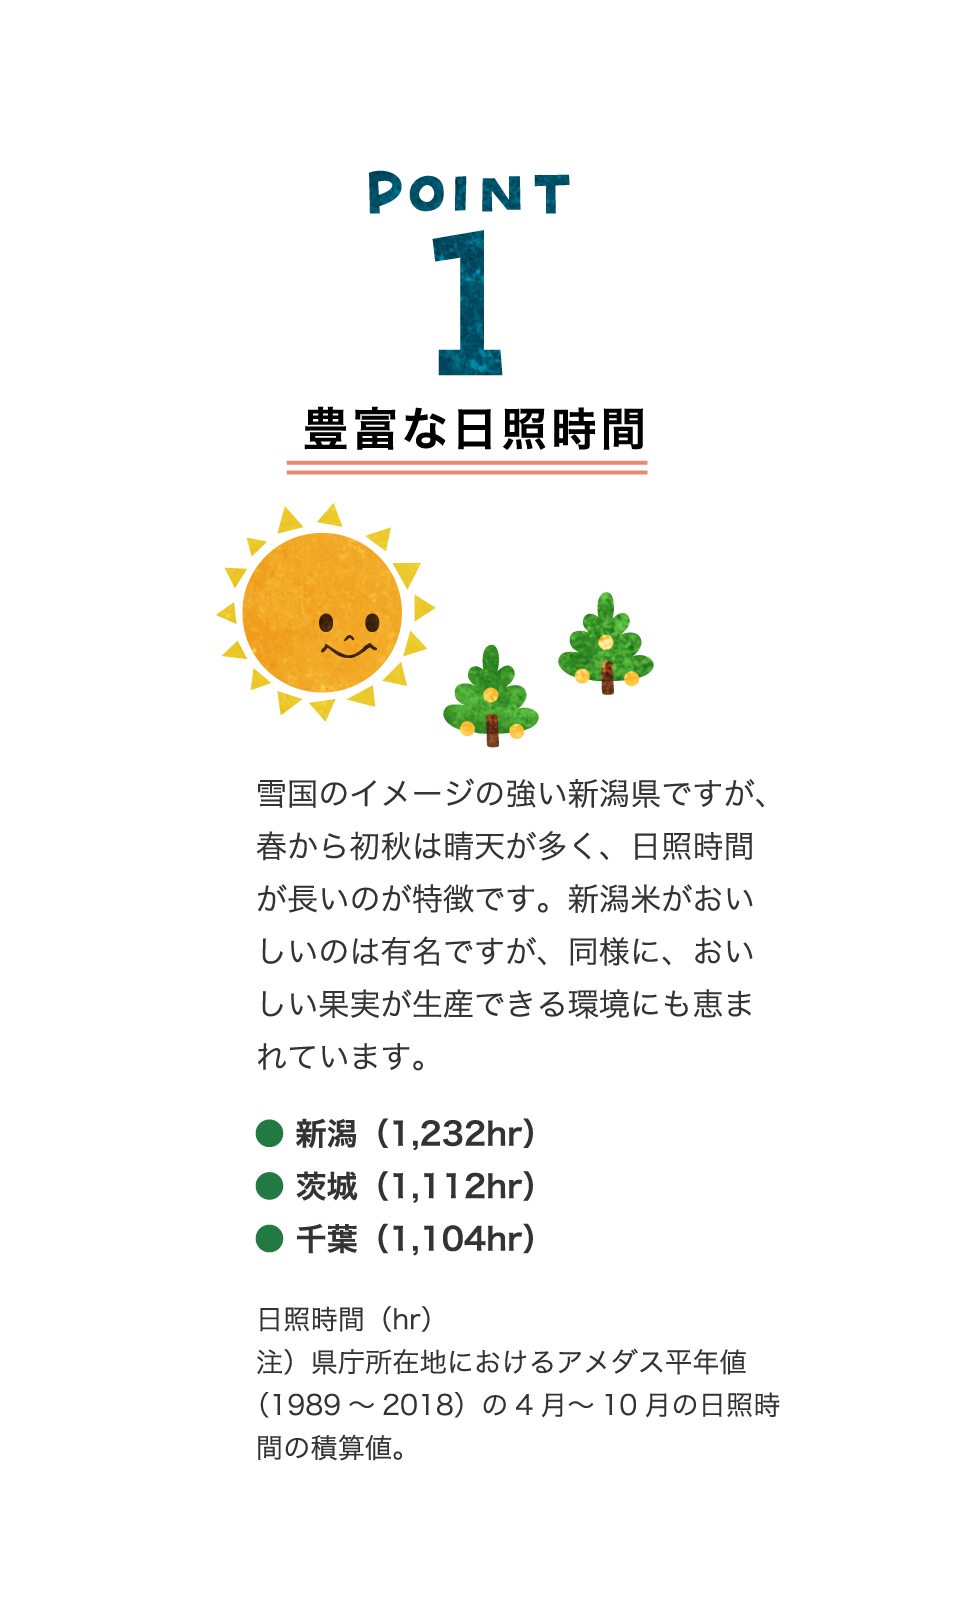 POINT1：豊富な日照時間